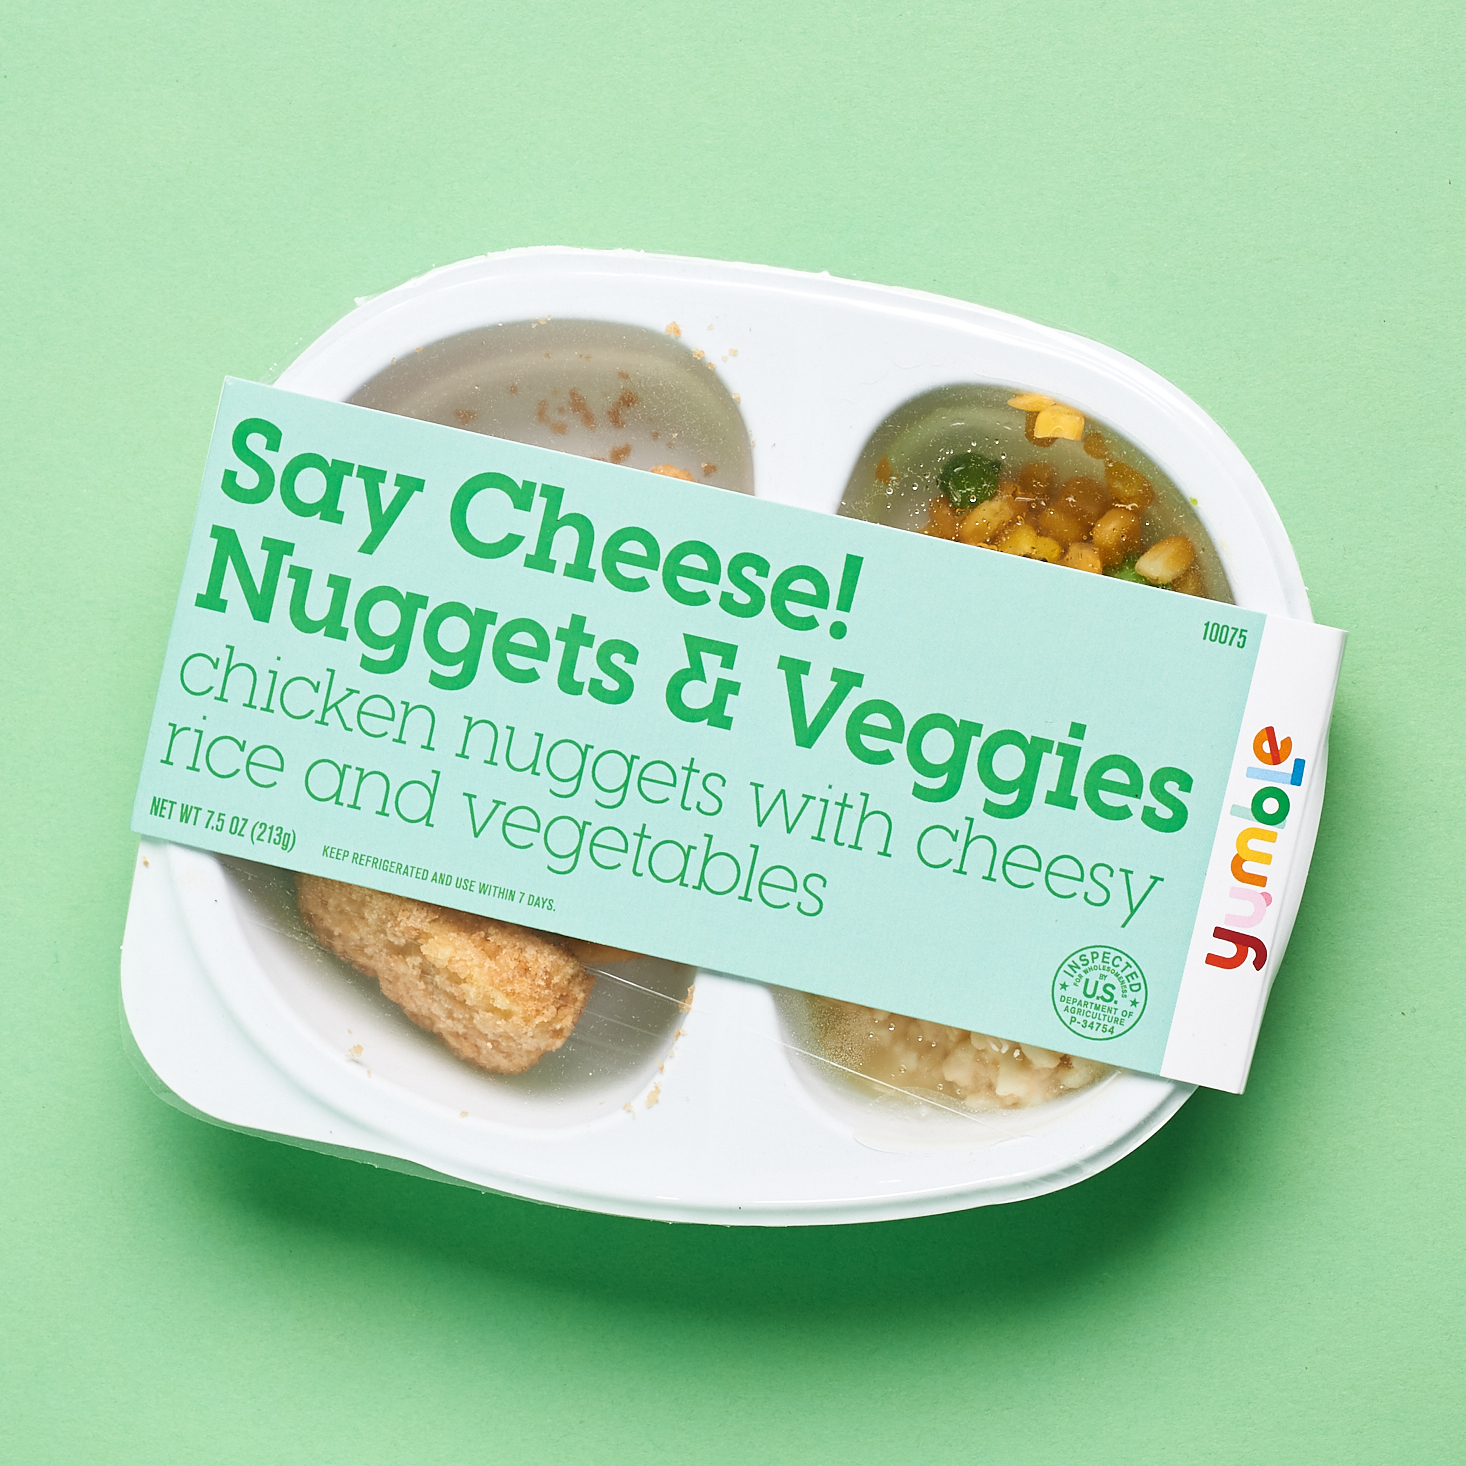 Yumble Subscription say cheese! nuggets & veggies meal